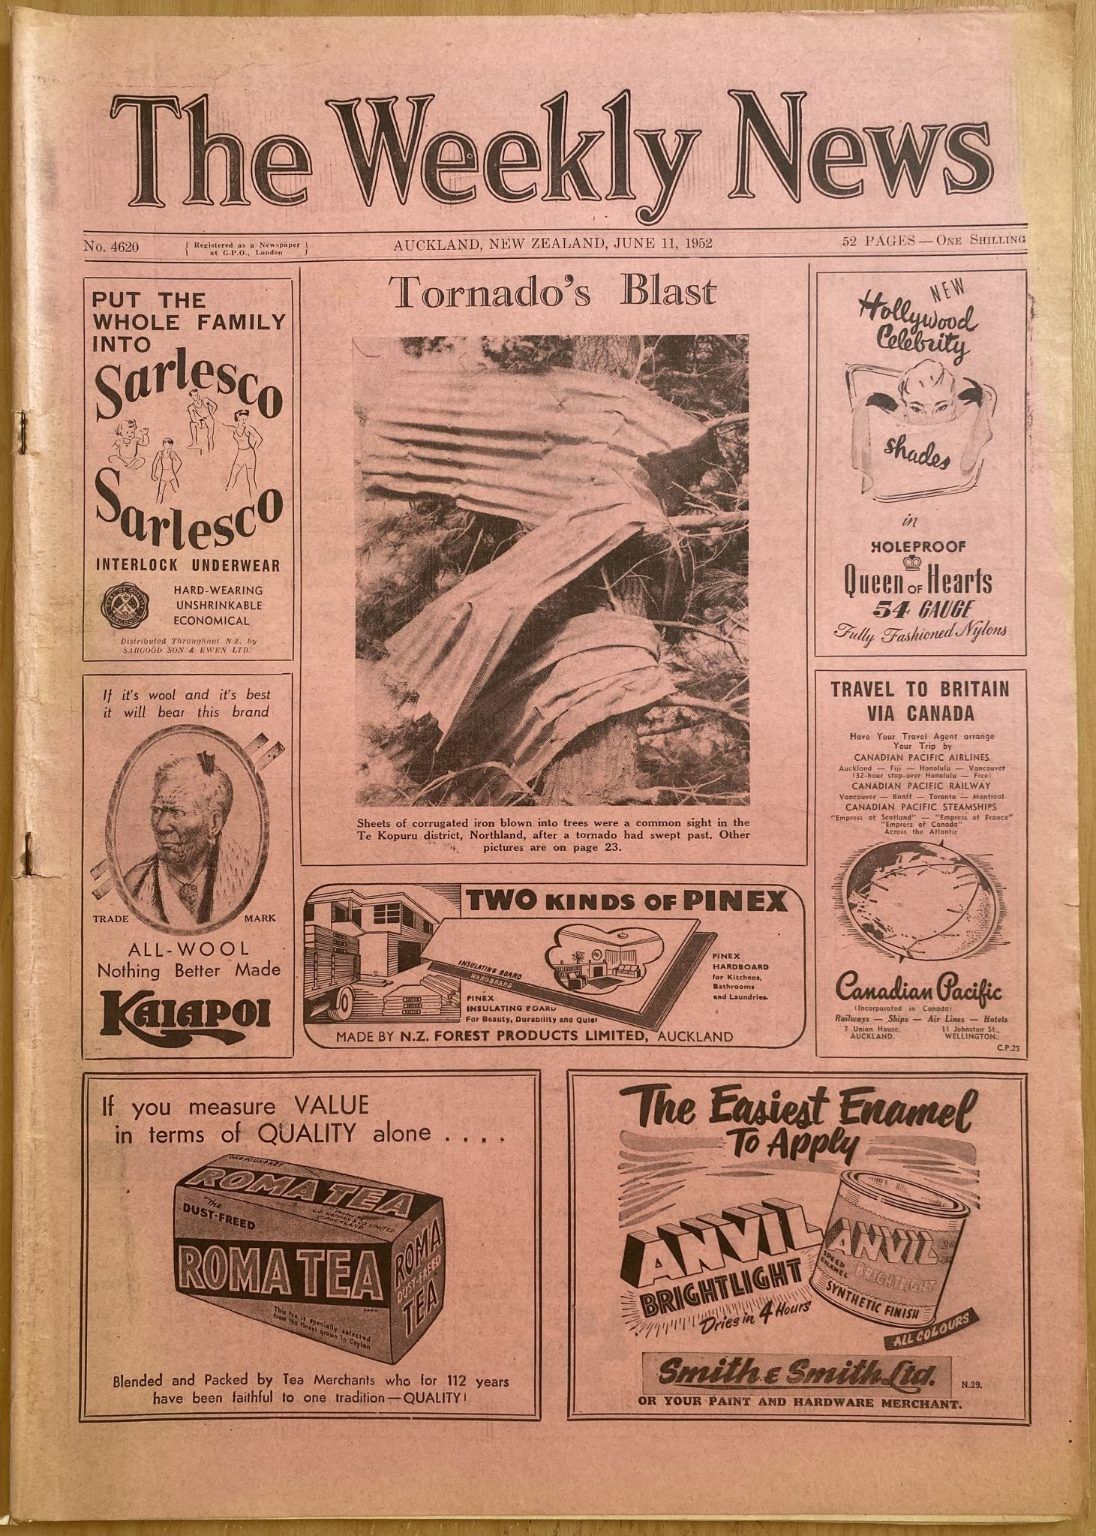 OLD NEWSPAPER: The Weekly News - No. 4620, 11 June 1952